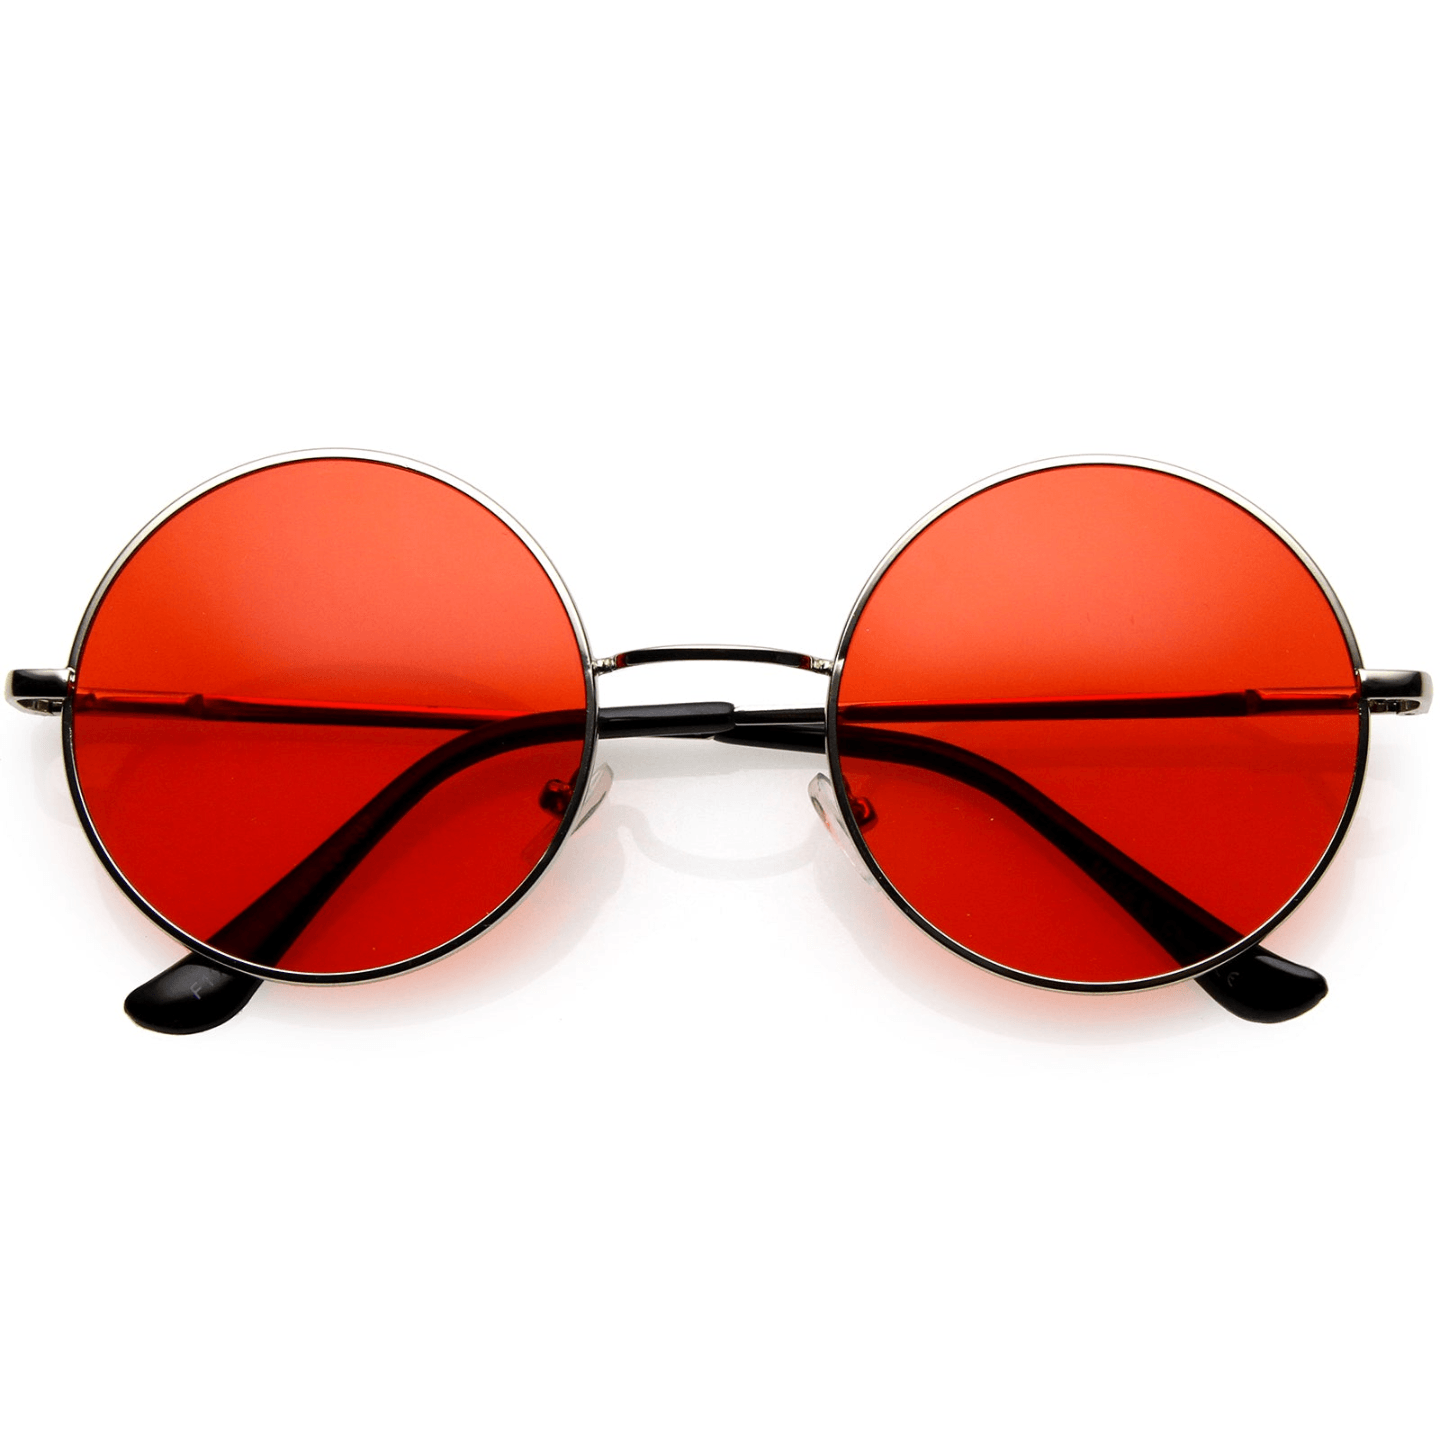 SMALL RETRO LENNON STYLE RED COLORED ROUND LENS METAL SUNGLASSES